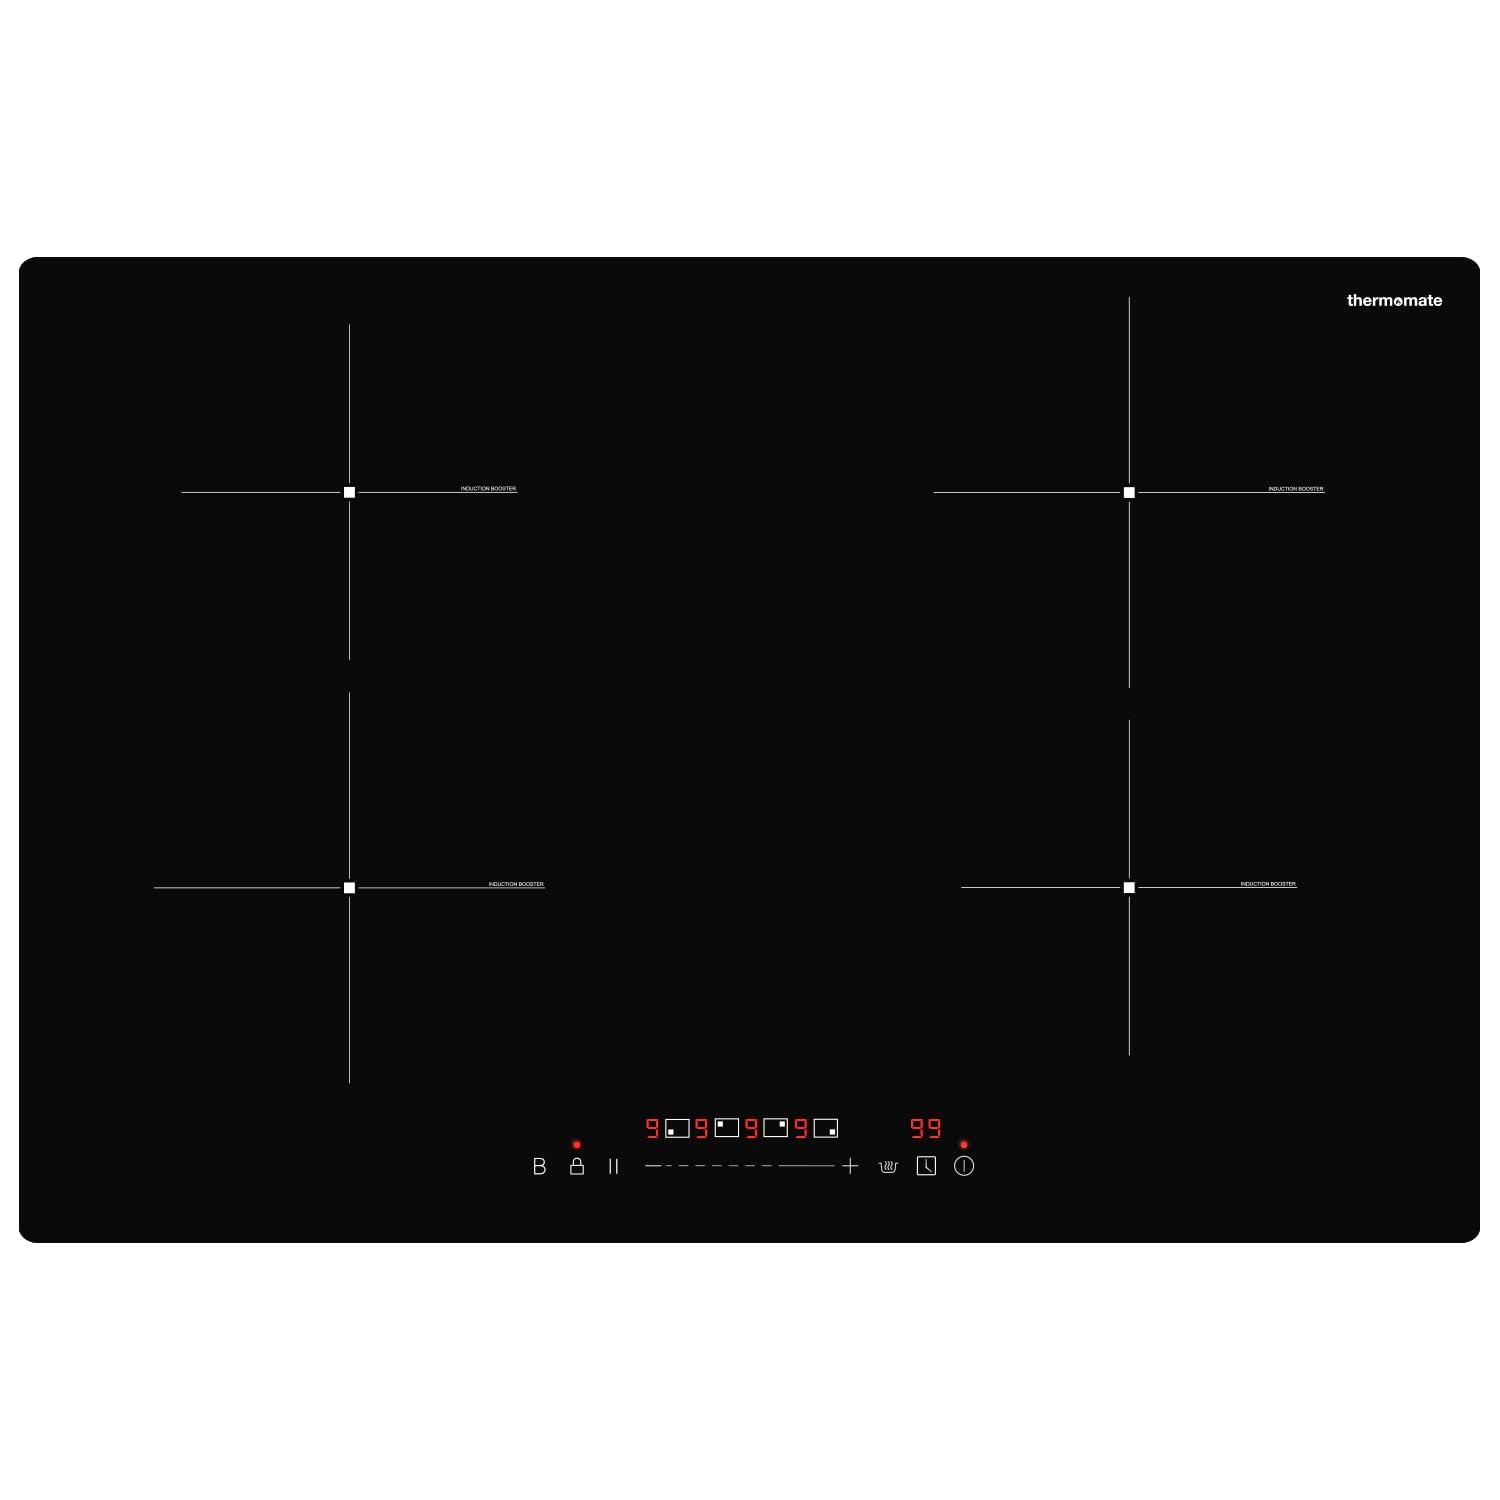 Thermomate 30 Inch Built-in Induction Cooktop with 4 Burners - 240V